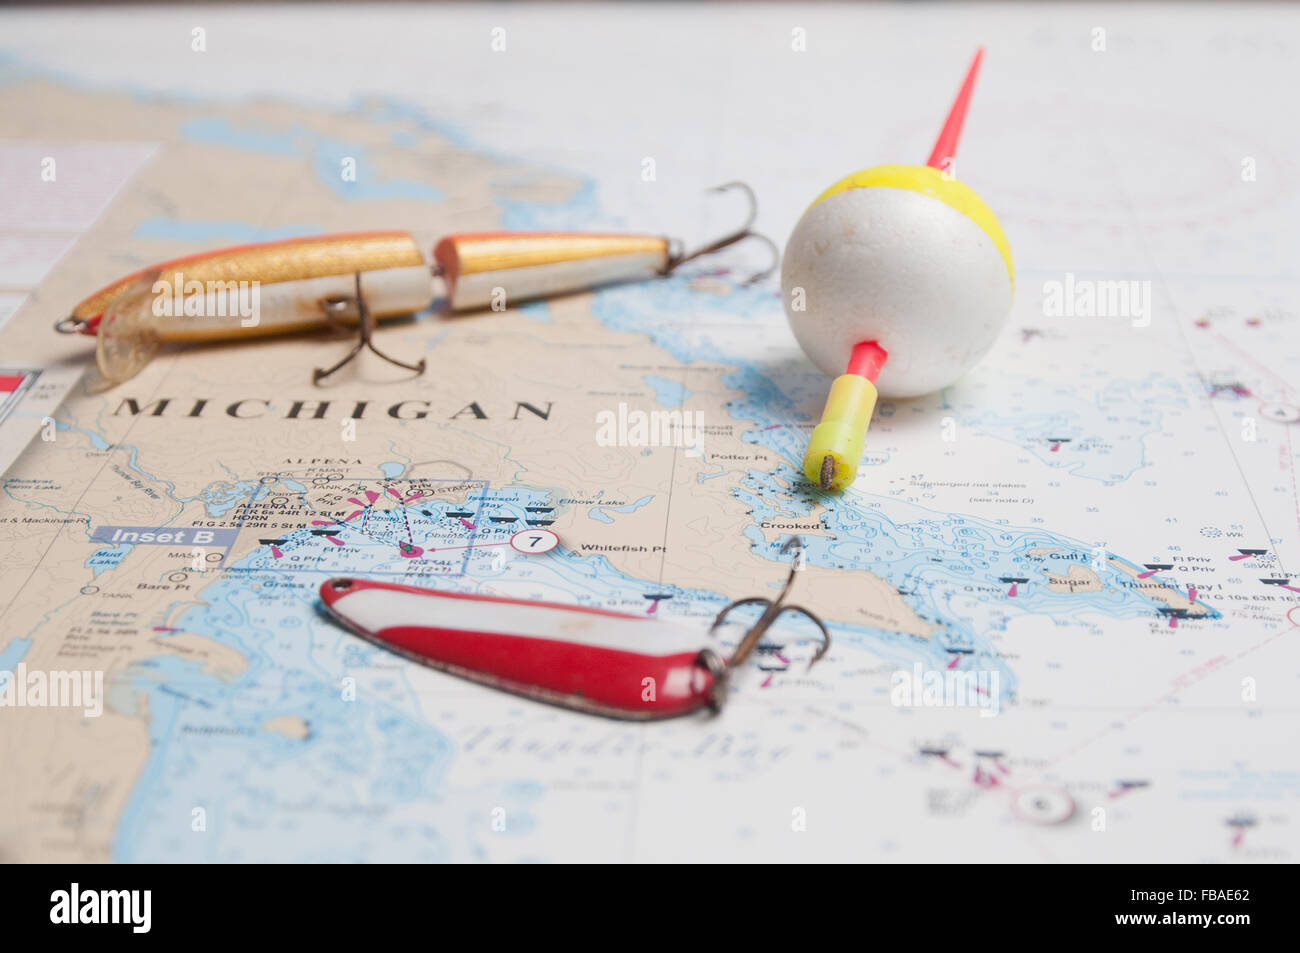 Fishing, boating, navigation; all require survival skills on the Great Lakes. Stock Photo